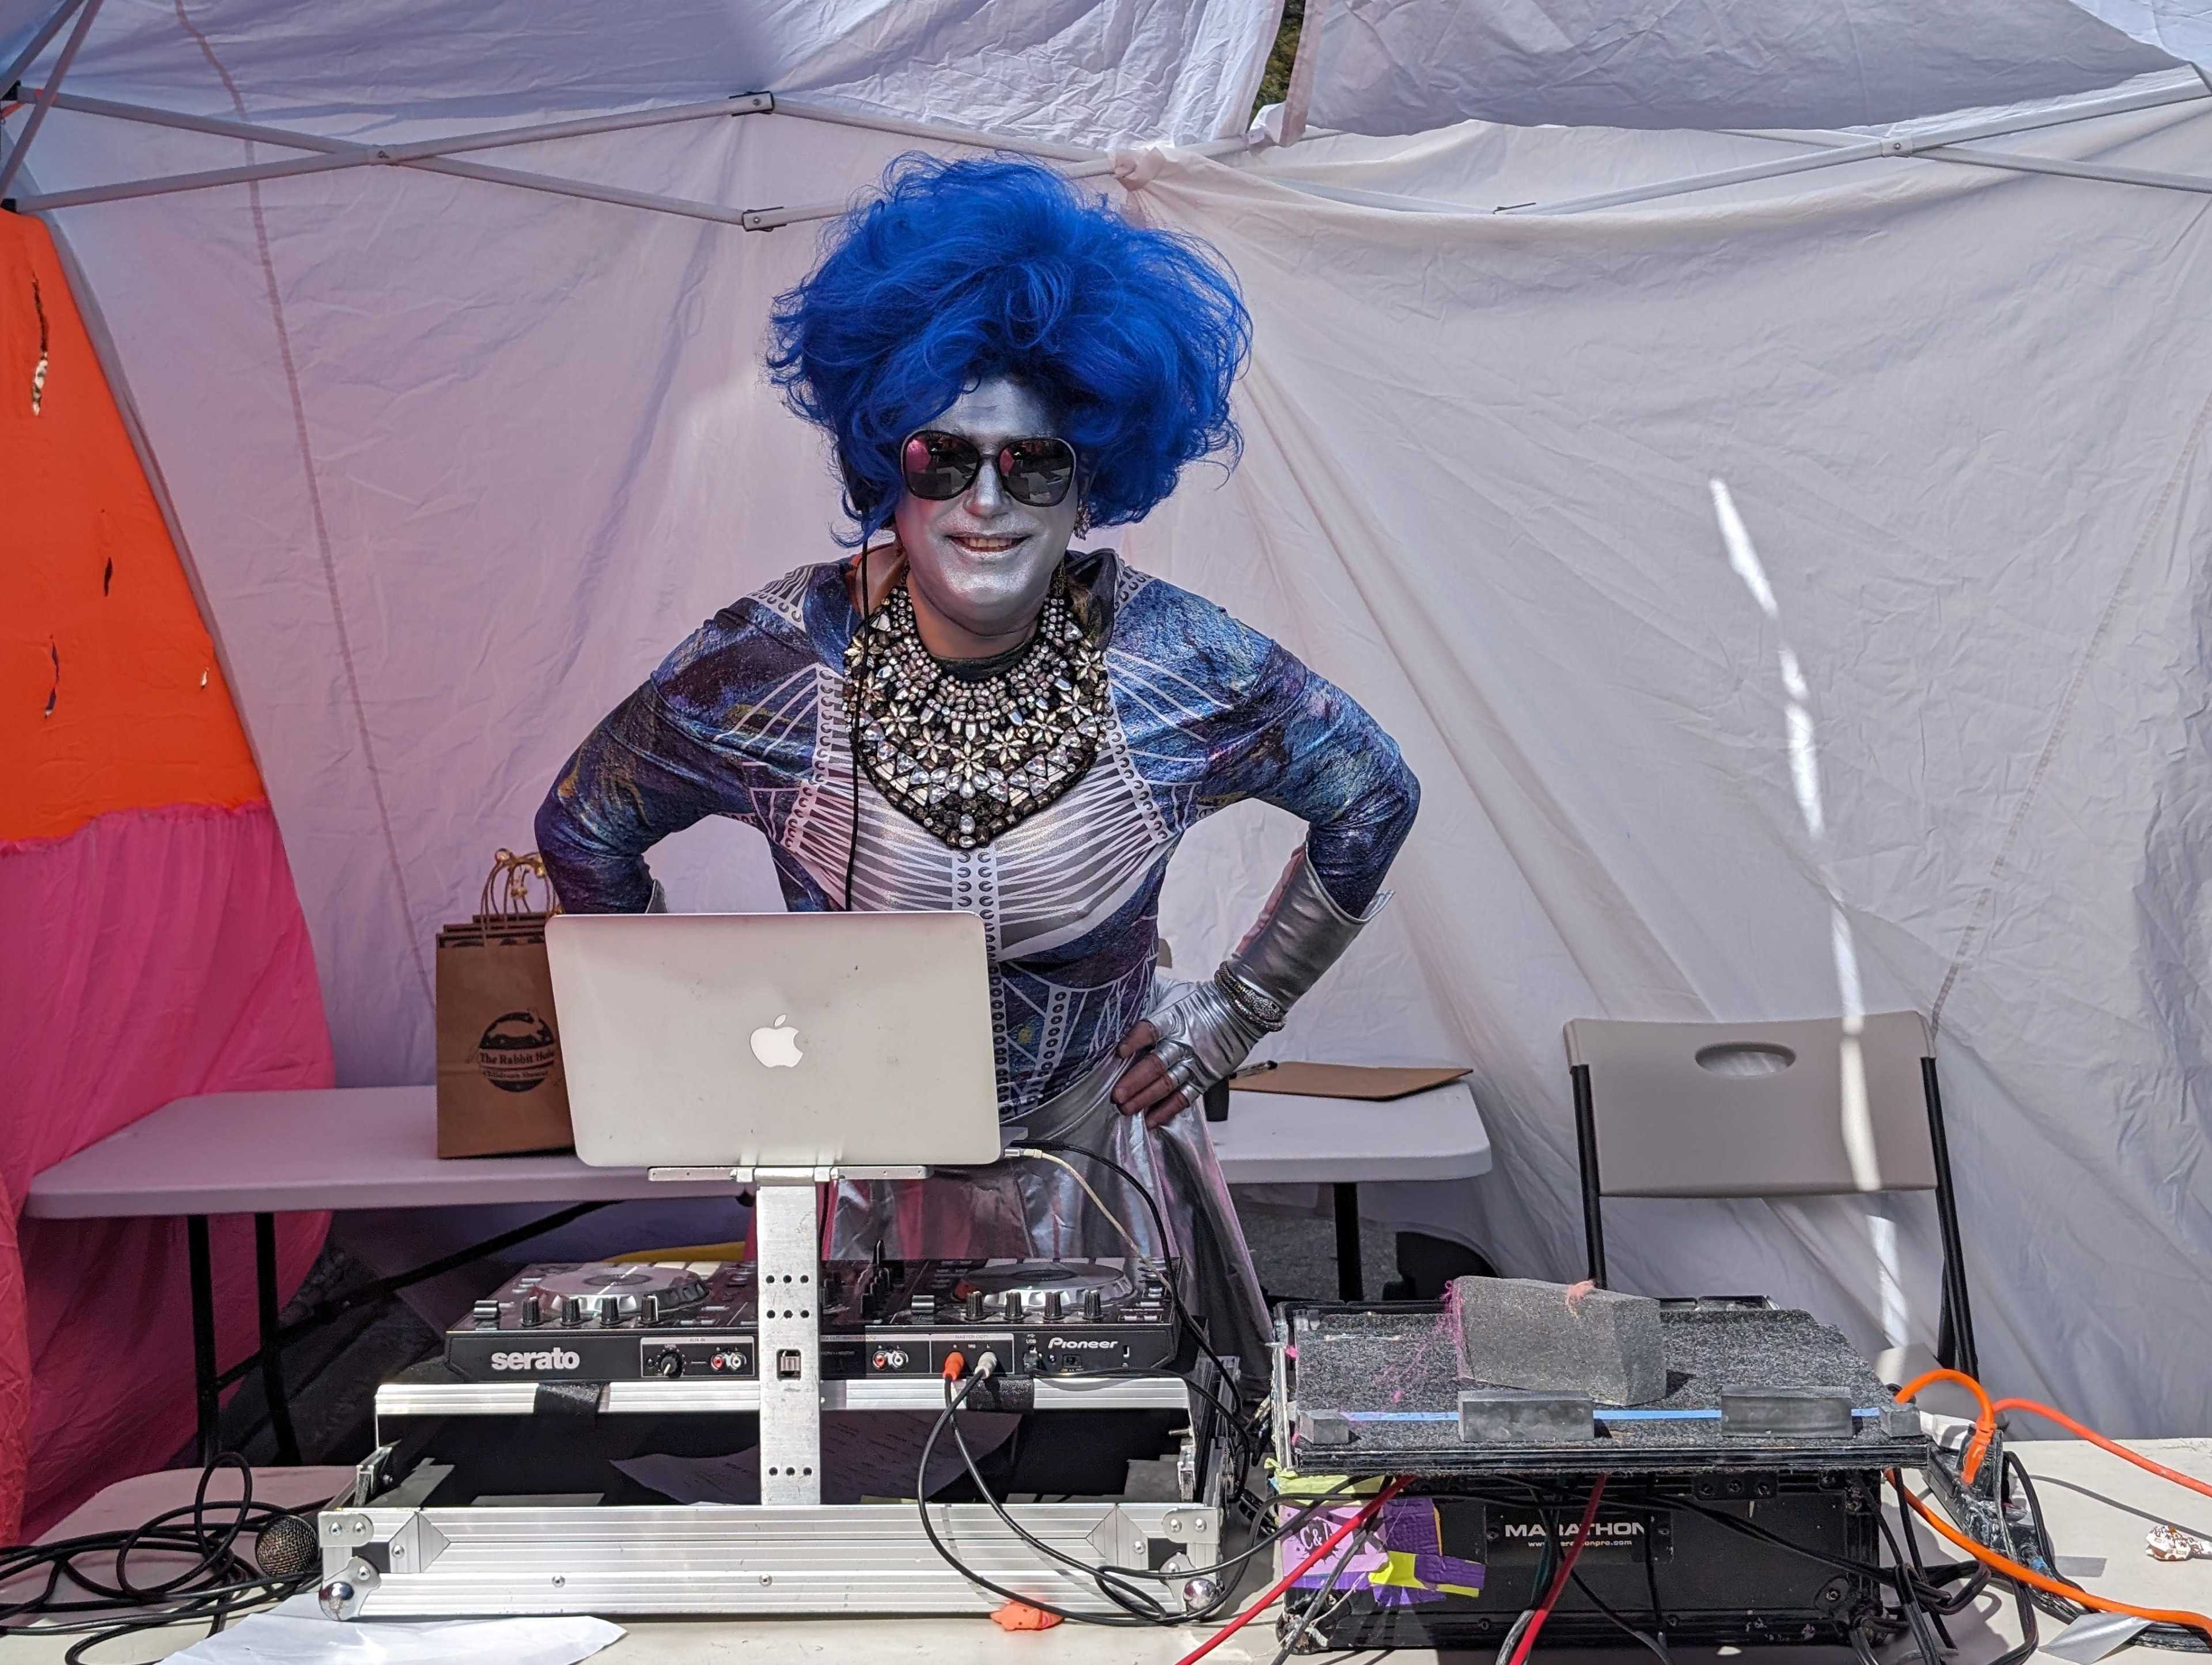 DJ Tweaka Turner spun uptempo tunes and classic dance-music cuts Sunday at a Halloween block party at Market and Noe streets.